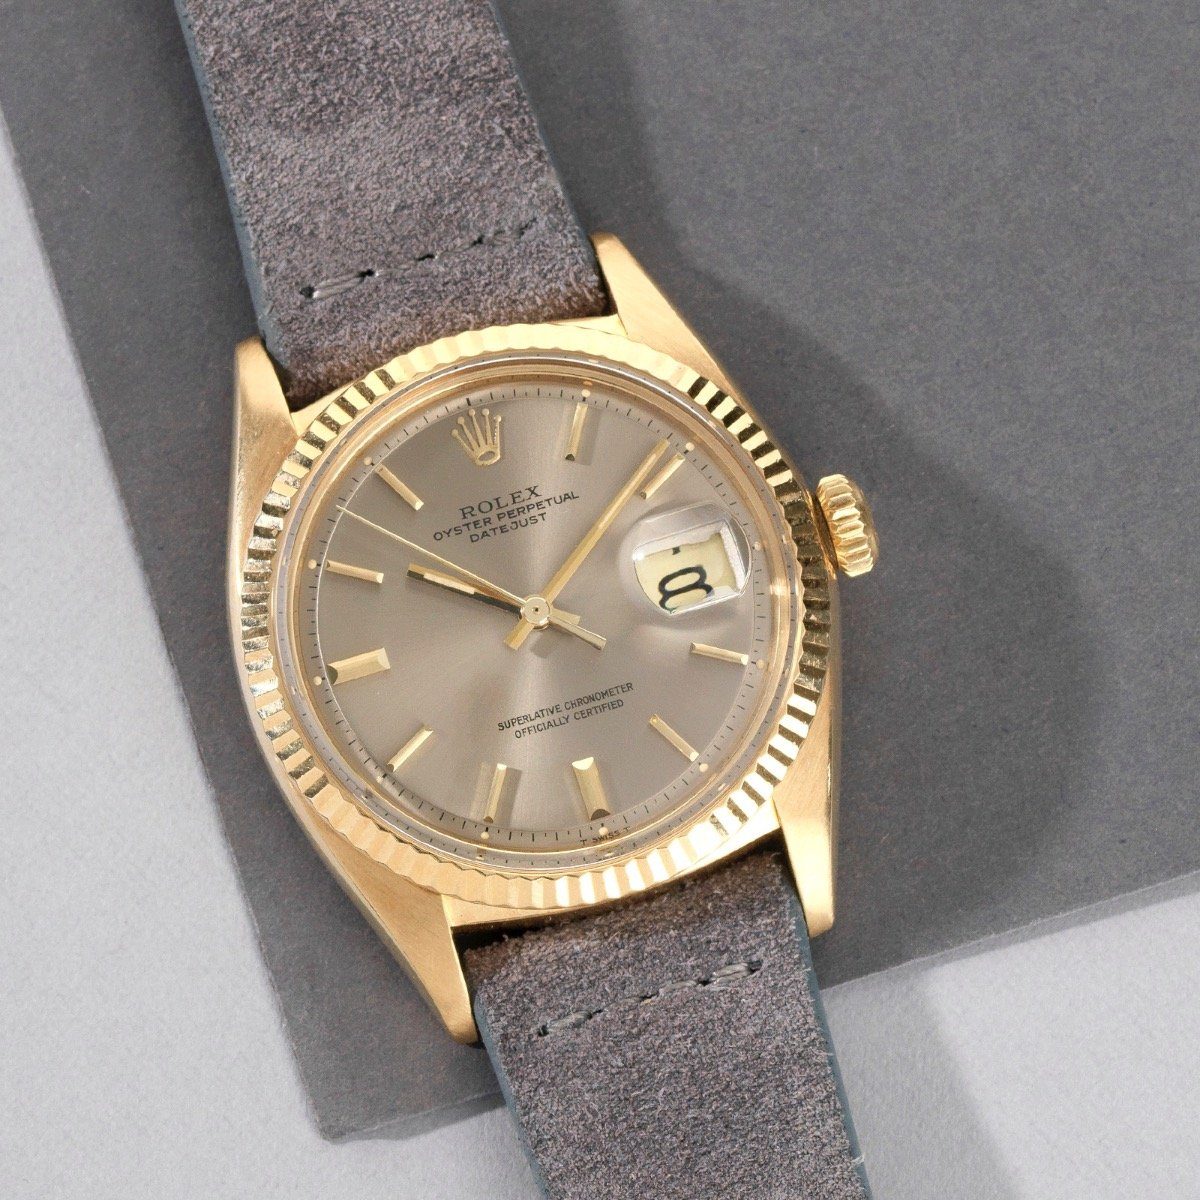 Rolex Datejust Reference 1601 18ct Gold